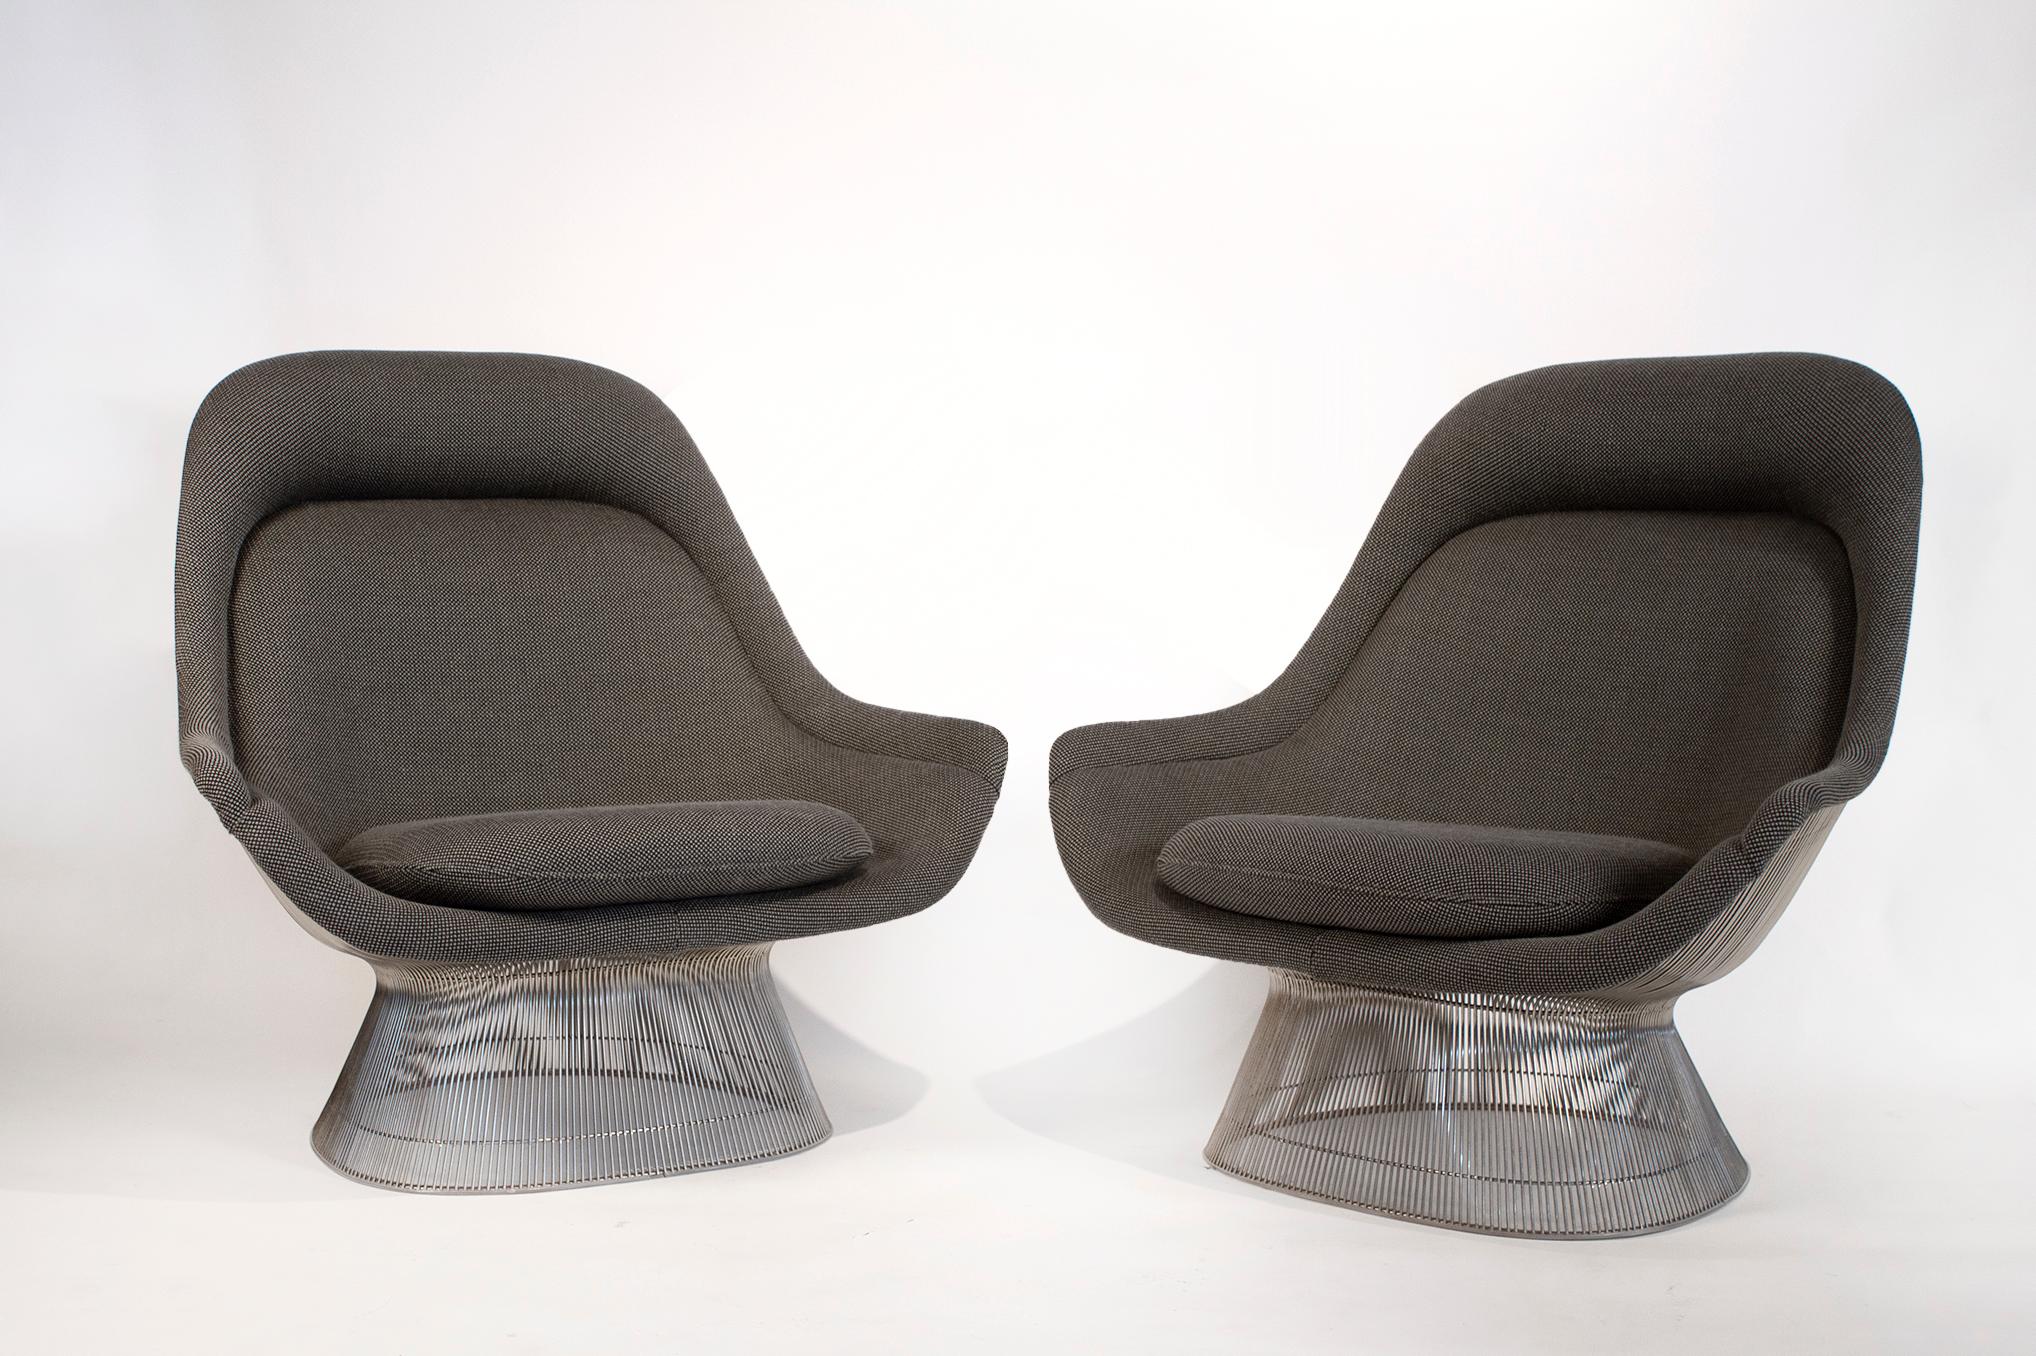 Vintage pair of high back lounge chairs designed by Warren Platner for Knoll in original wool tweed upholstery in very good condition. These chairs were sent back to Knoll about 10 years ago and were completely re-foamed and reupholstered in their